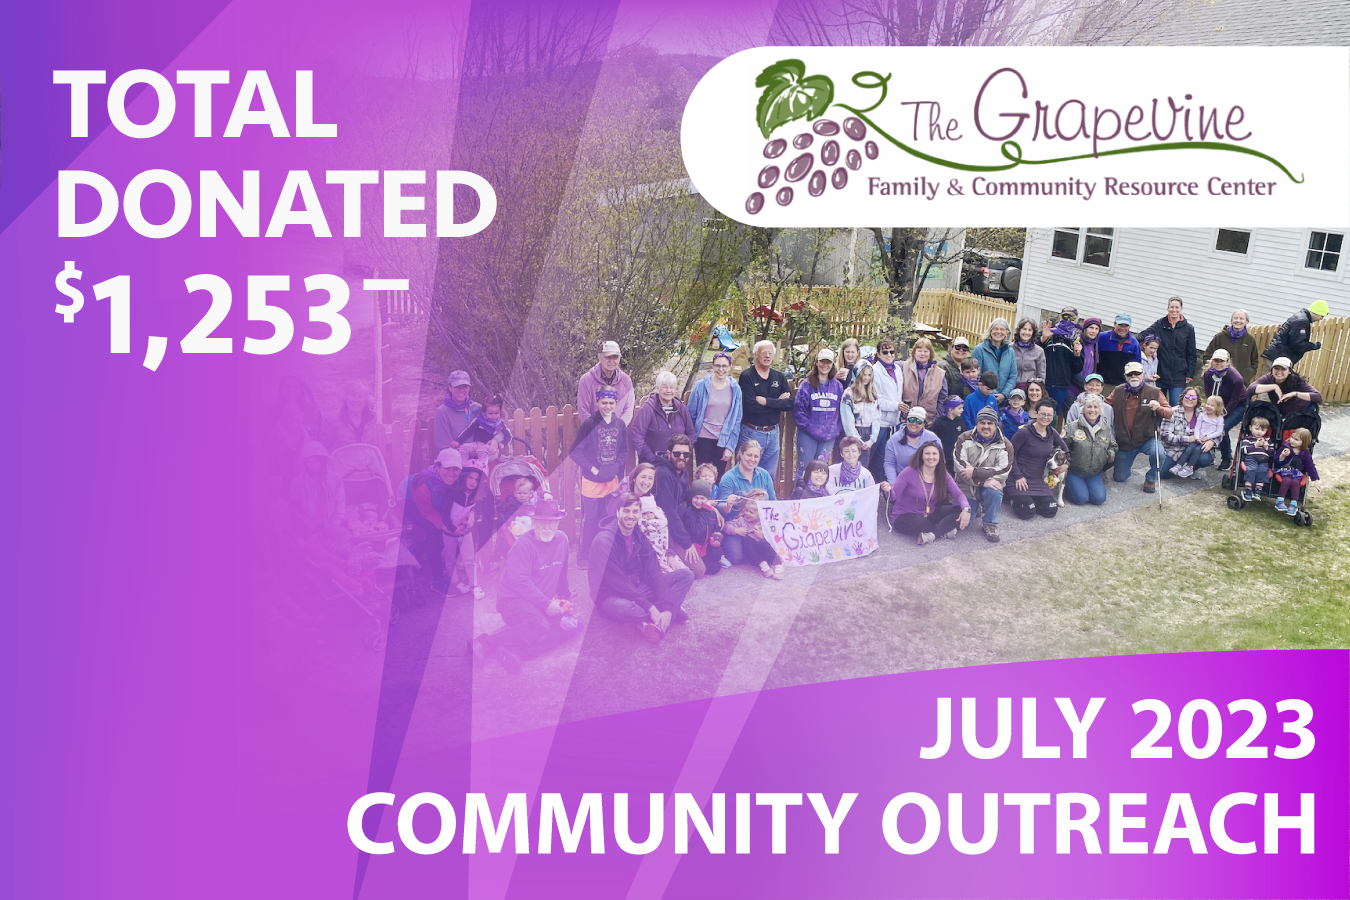 Graphic promoting our July 2023 Community Outreach benefactor - The Grapevine.